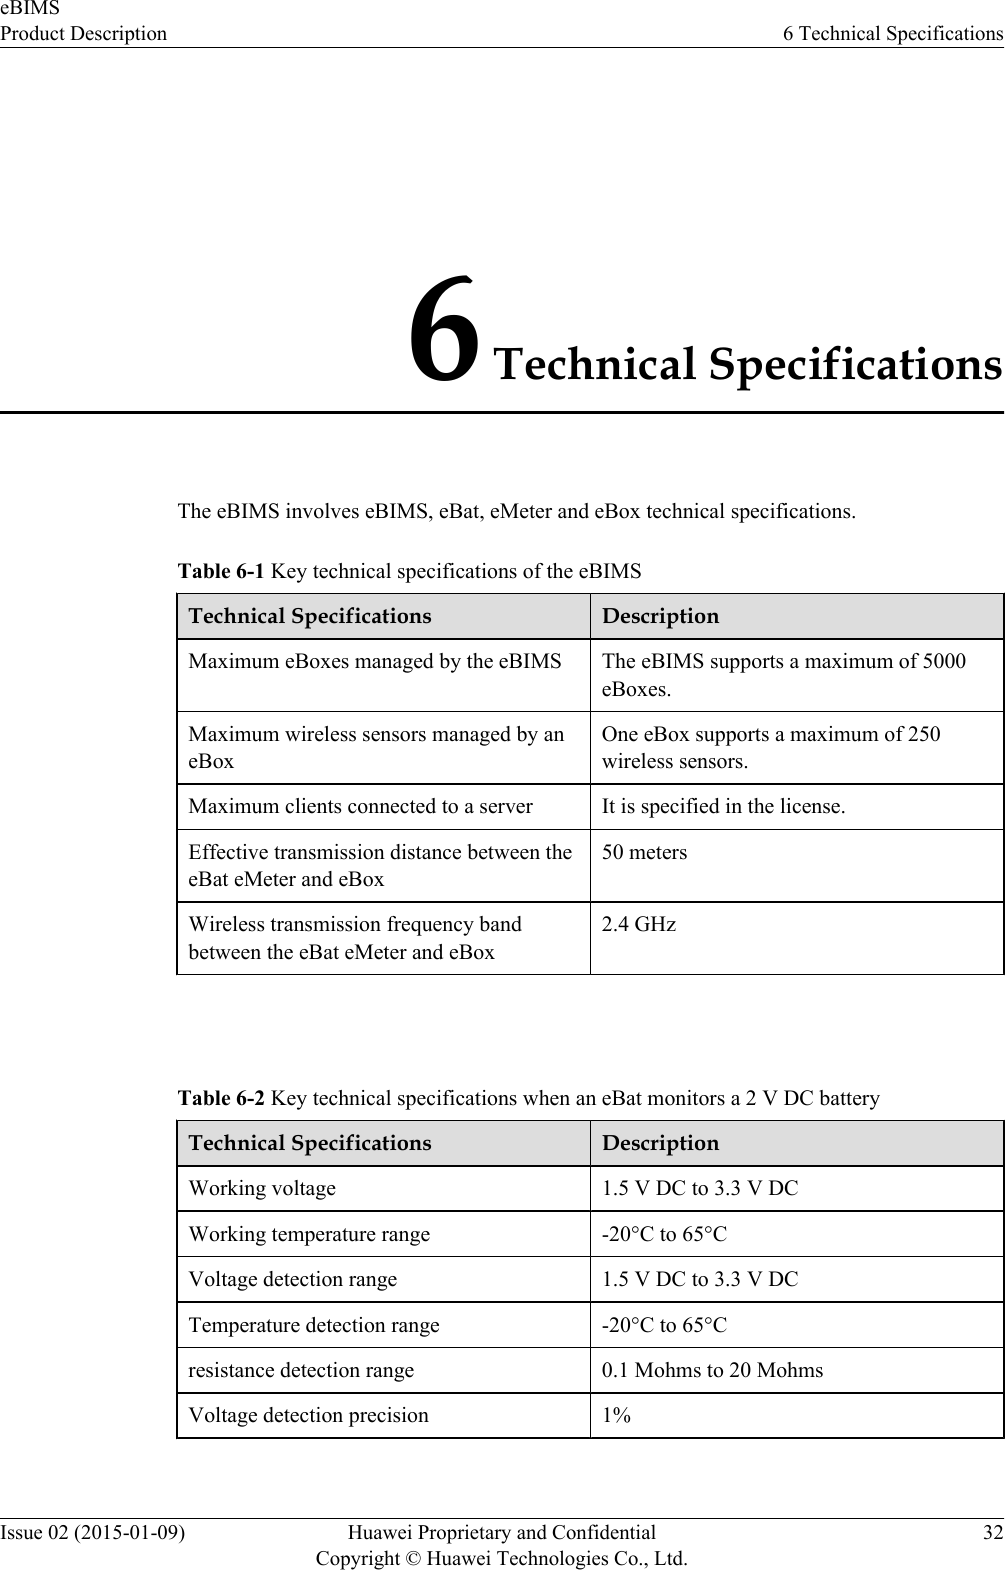 6 Technical SpecificationsThe eBIMS involves eBIMS, eBat, eMeter and eBox technical specifications.Table 6-1 Key technical specifications of the eBIMSTechnical Specifications DescriptionMaximum eBoxes managed by the eBIMS The eBIMS supports a maximum of 5000eBoxes.Maximum wireless sensors managed by aneBoxOne eBox supports a maximum of 250wireless sensors.Maximum clients connected to a server It is specified in the license.Effective transmission distance between theeBat eMeter and eBox50 metersWireless transmission frequency bandbetween the eBat eMeter and eBox2.4 GHz Table 6-2 Key technical specifications when an eBat monitors a 2 V DC batteryTechnical Specifications DescriptionWorking voltage 1.5 V DC to 3.3 V DCWorking temperature range -20°C to 65°CVoltage detection range 1.5 V DC to 3.3 V DCTemperature detection range -20°C to 65°Cresistance detection range 0.1 Mohms to 20 MohmsVoltage detection precision 1%eBIMSProduct Description 6 Technical SpecificationsIssue 02 (2015-01-09) Huawei Proprietary and ConfidentialCopyright © Huawei Technologies Co., Ltd.32